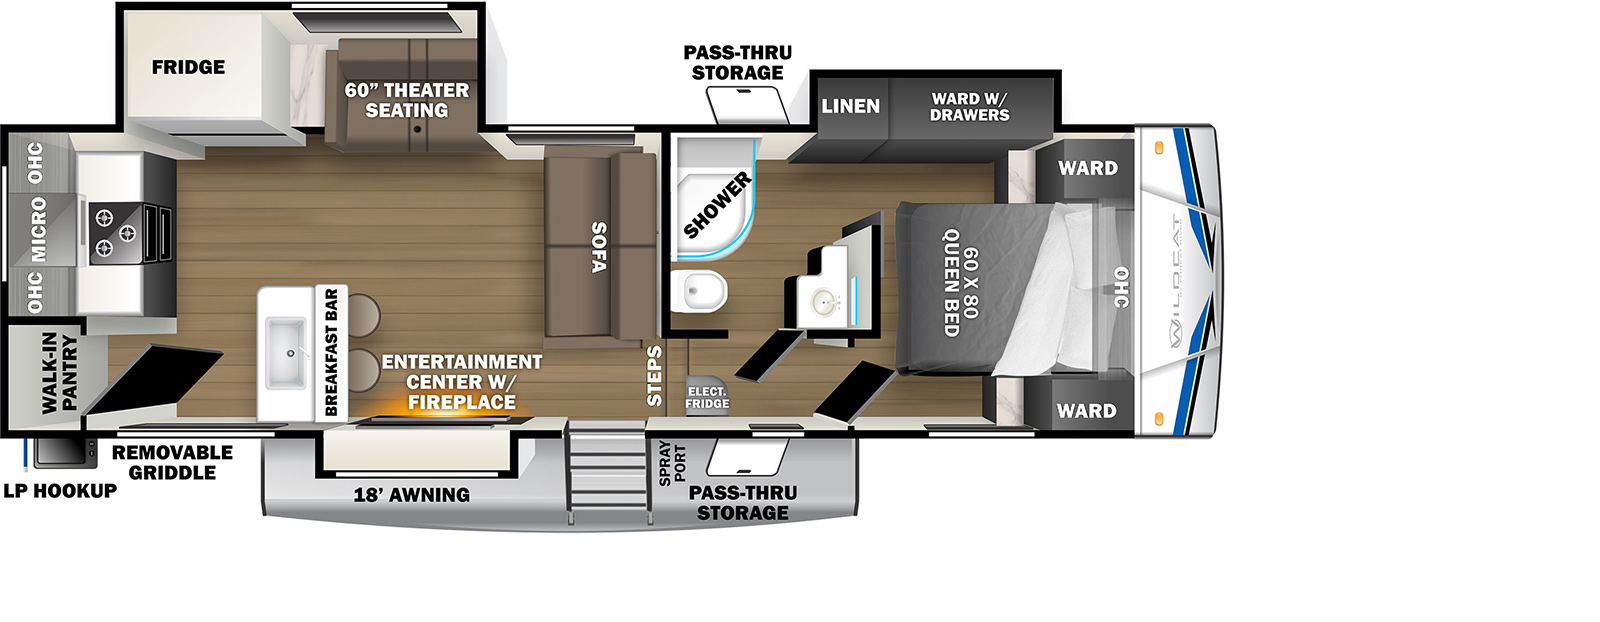 The Wildcat 271ML floorplan exterior sports a 20 foot electric power awning. It also features an outside kitchen on the door side. This floorplan has two slid eouts. Located toward the center of the RV, the entry door leads to a living area on the left and steps leading to a hallway on the right. In the living area on the off-door slide out, is a refrigerator to the left, an end table in the center and a 60” theater sofa to the right. The front of the living area has a tri-fold sofa with storage above. Directly to the left of the entrance door is a slide out that houses the outside kitchen as well as a 50 inch TV with storage and a fireplace below. The rear of the living area features a walk-in pantry and a stove and countertop with microwave and storage above. The front of the RV has a bathroom with a shower, toilet, sink, linen storage. The bedroom houses a front queen bed with nightstands and wardrobes on either side and storage above.